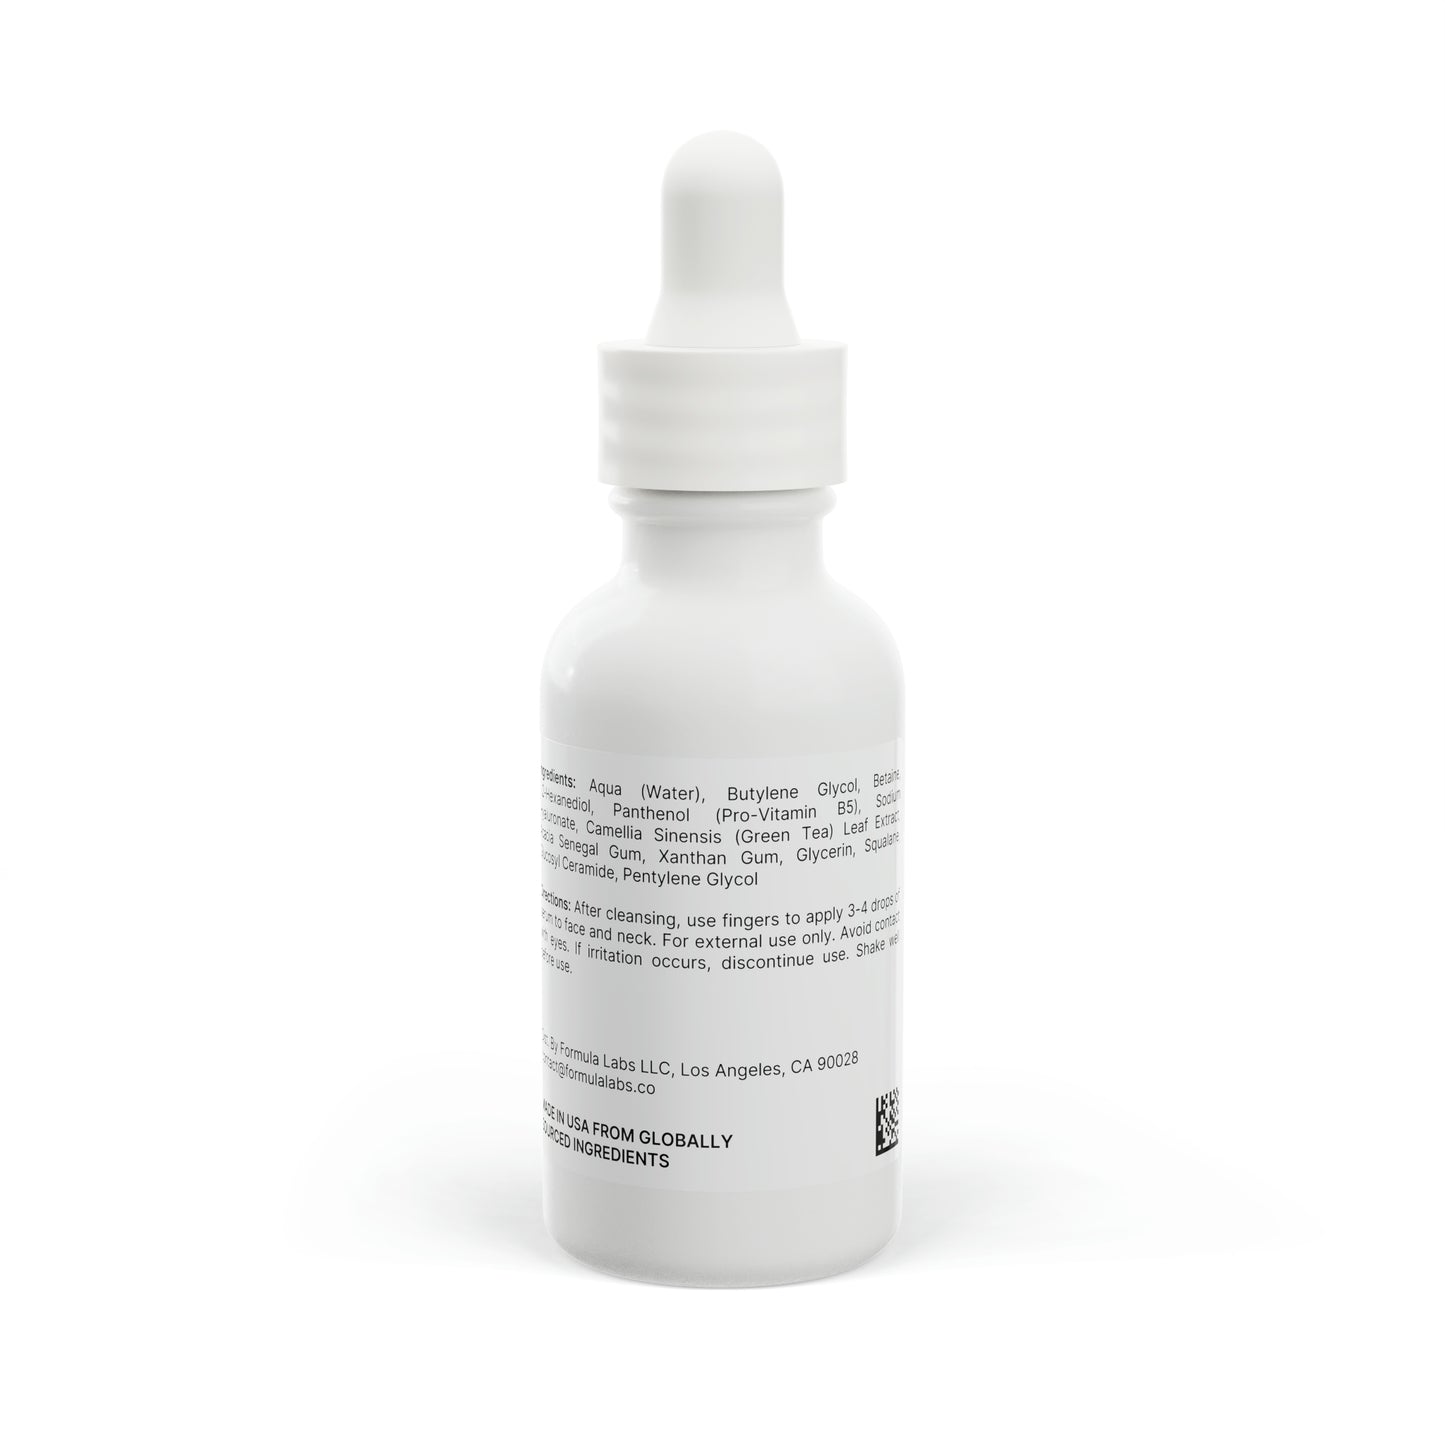 Hyaluronic Acid Complex Serum, 1oz Provided By DuGamii